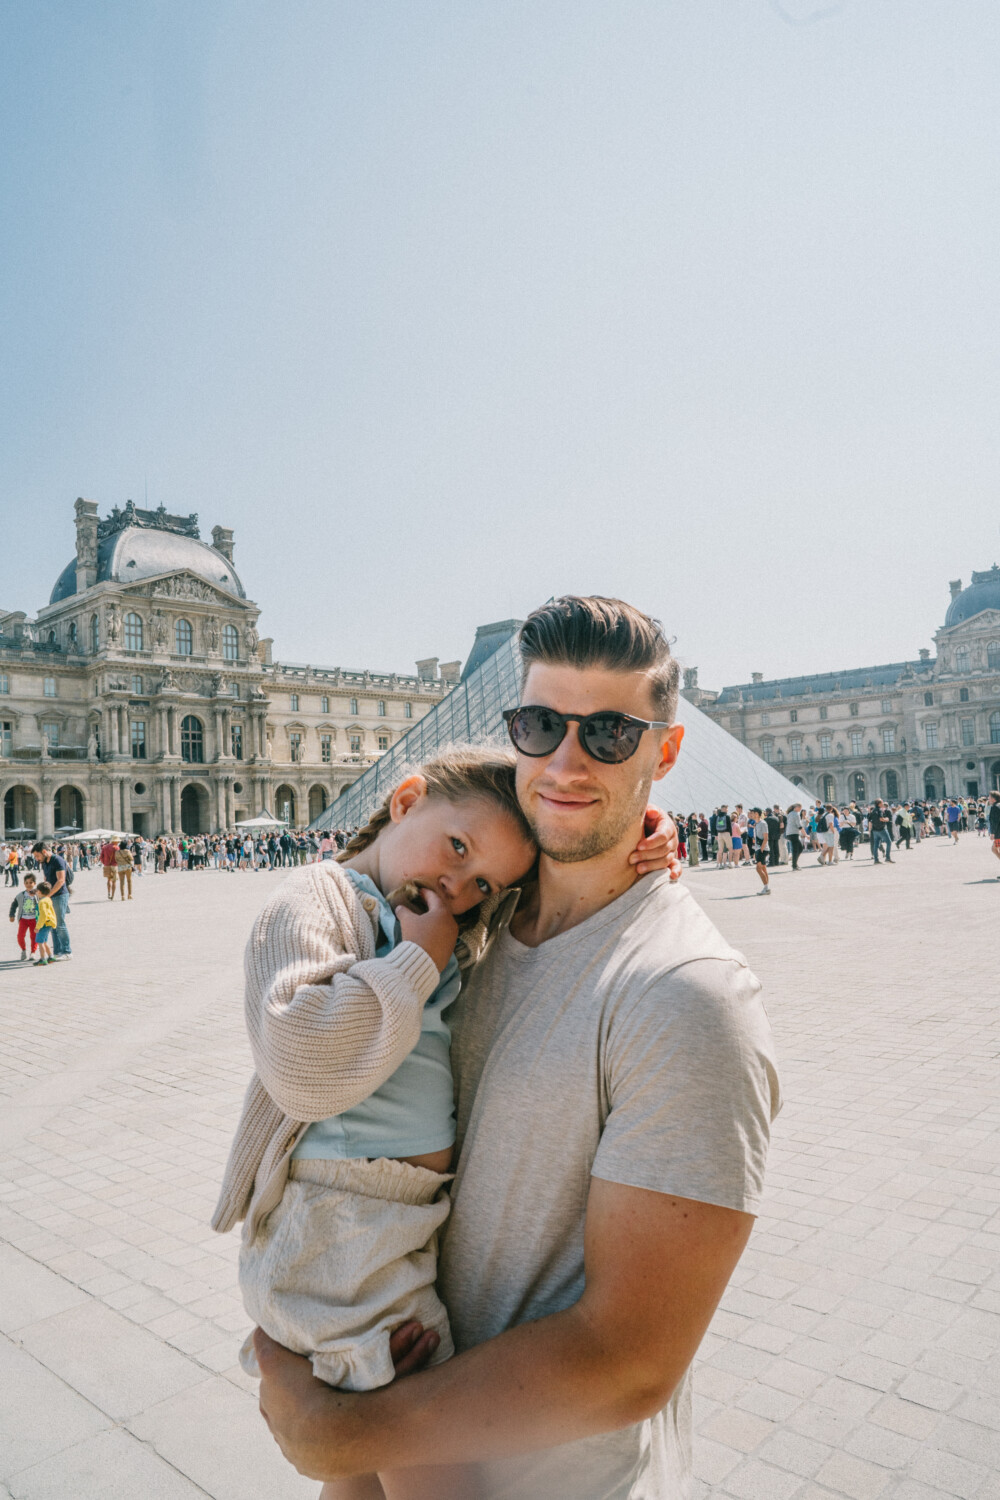 man carrying her child and taking a photo near the Louvre 